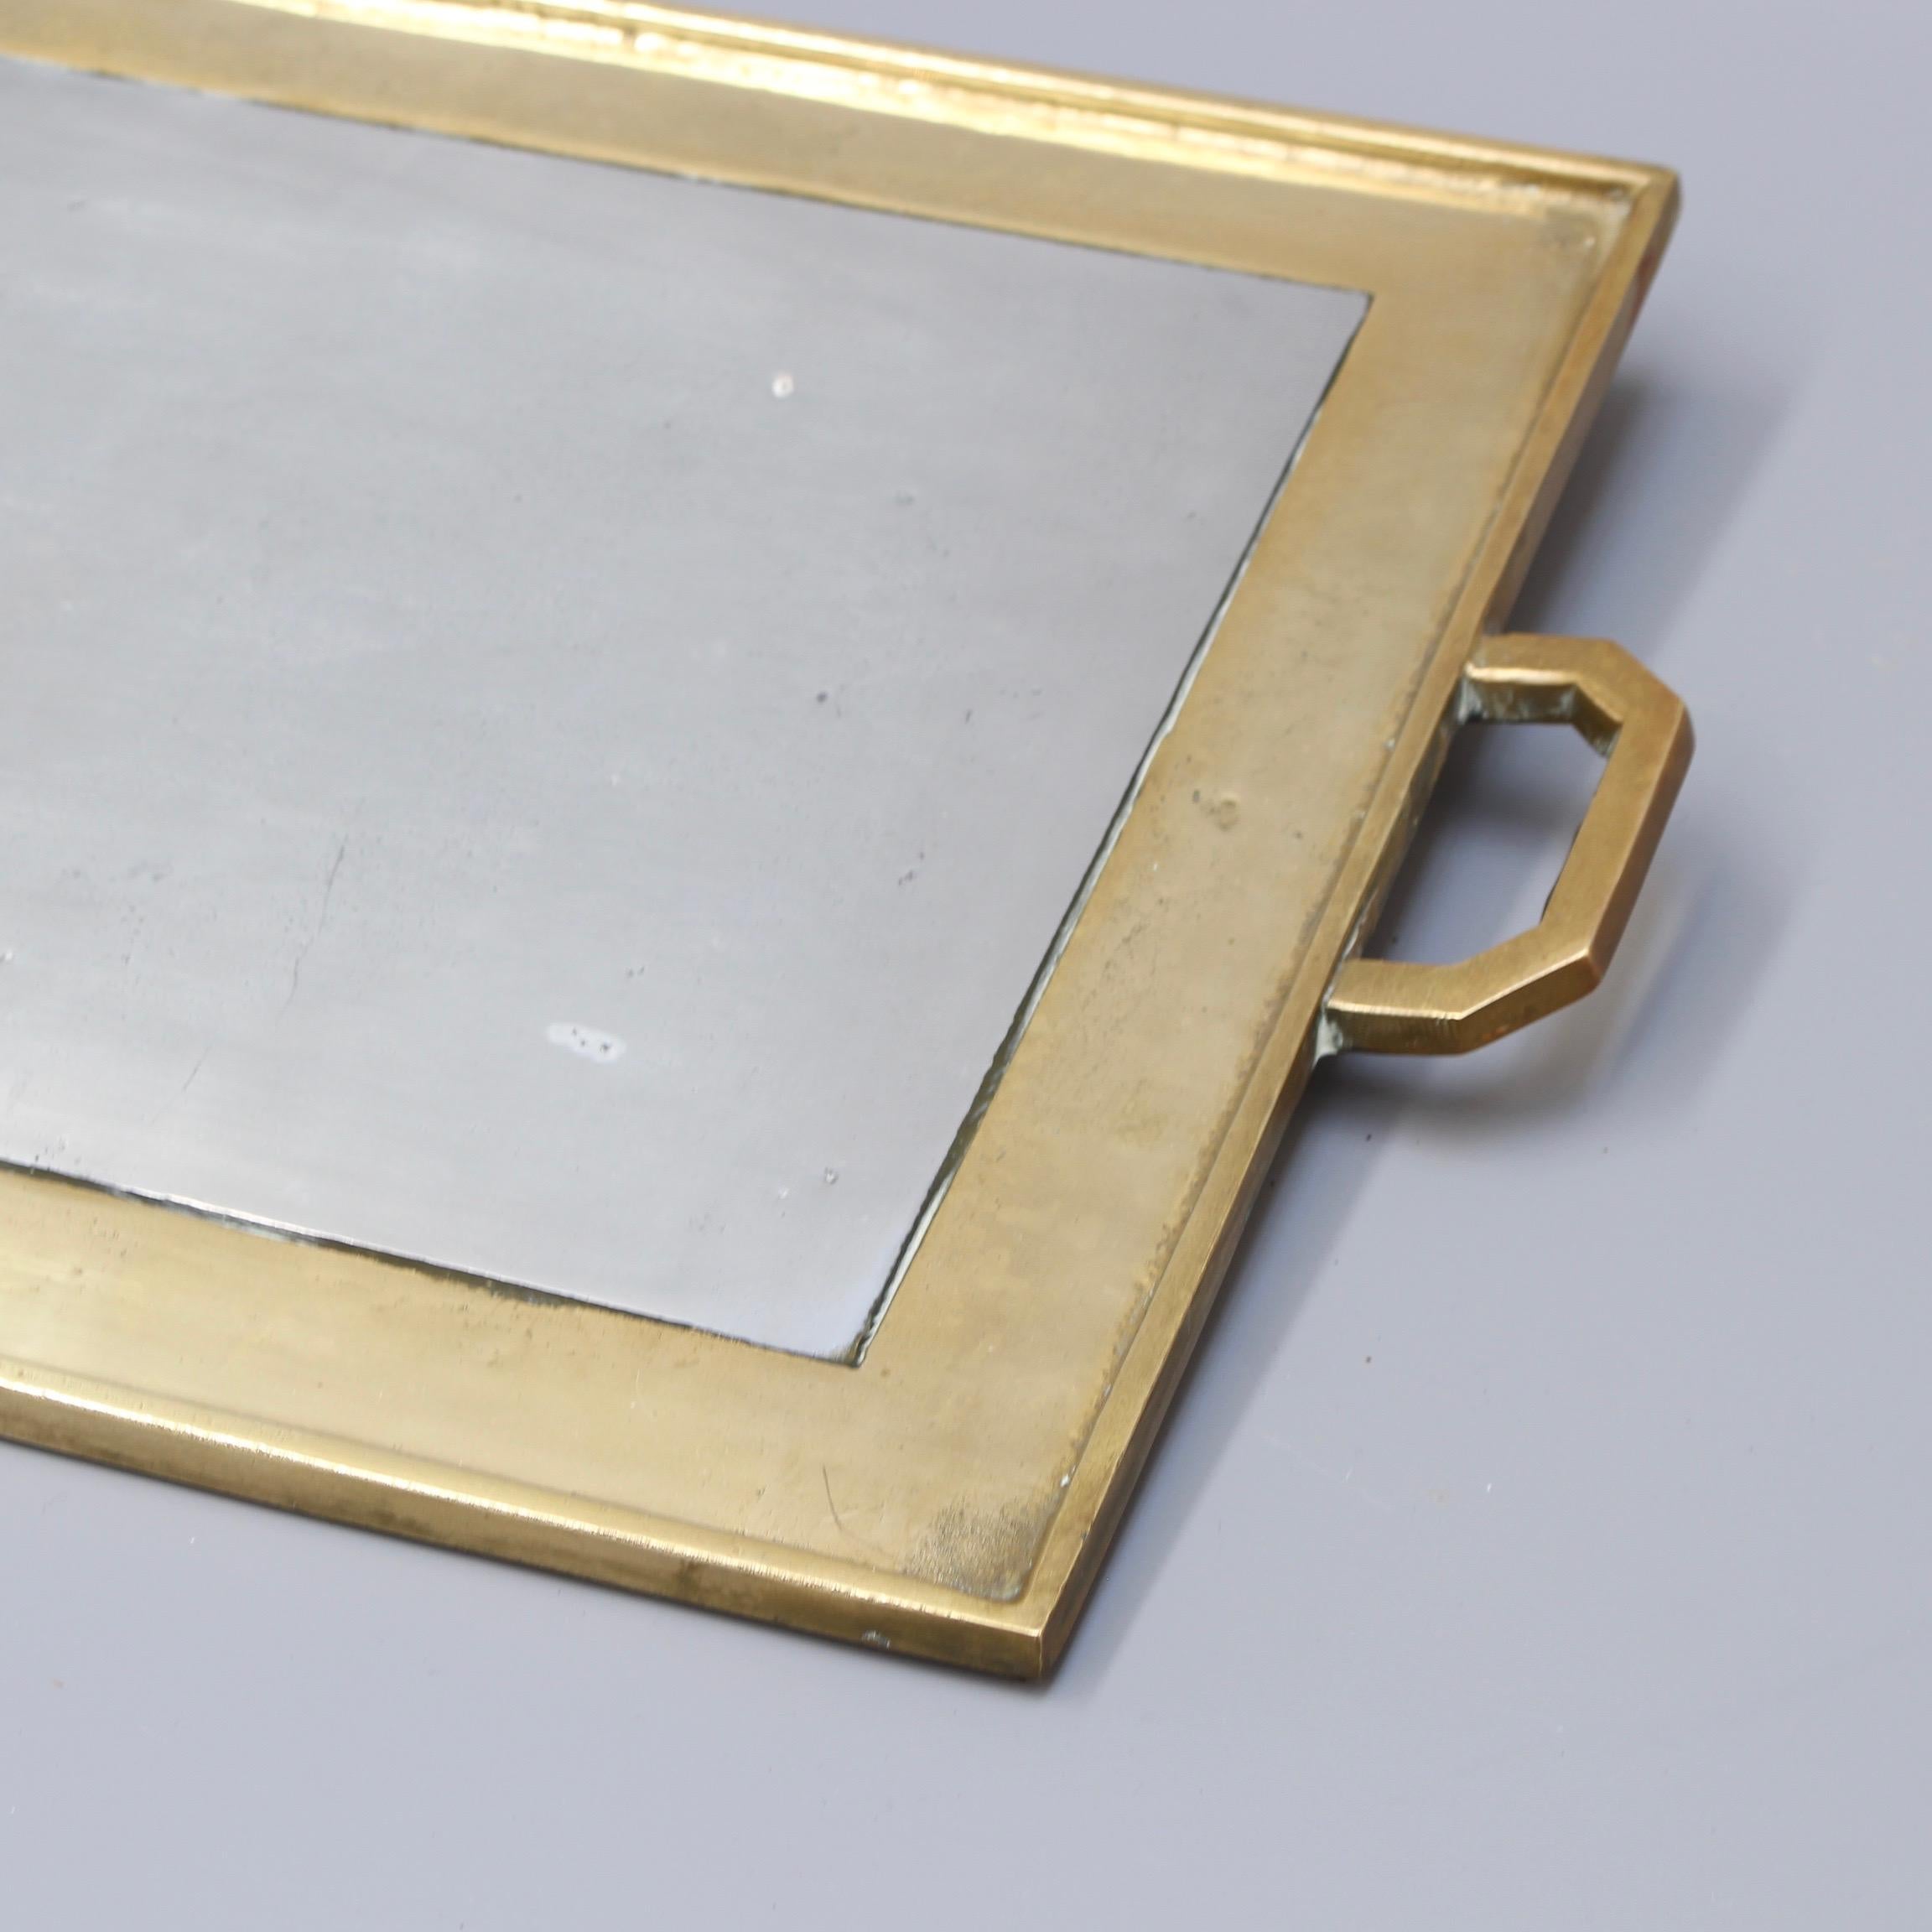 Aluminum Aluminium and Brass Brutalist Style Serving Tray by David Marshall, circa 1970s